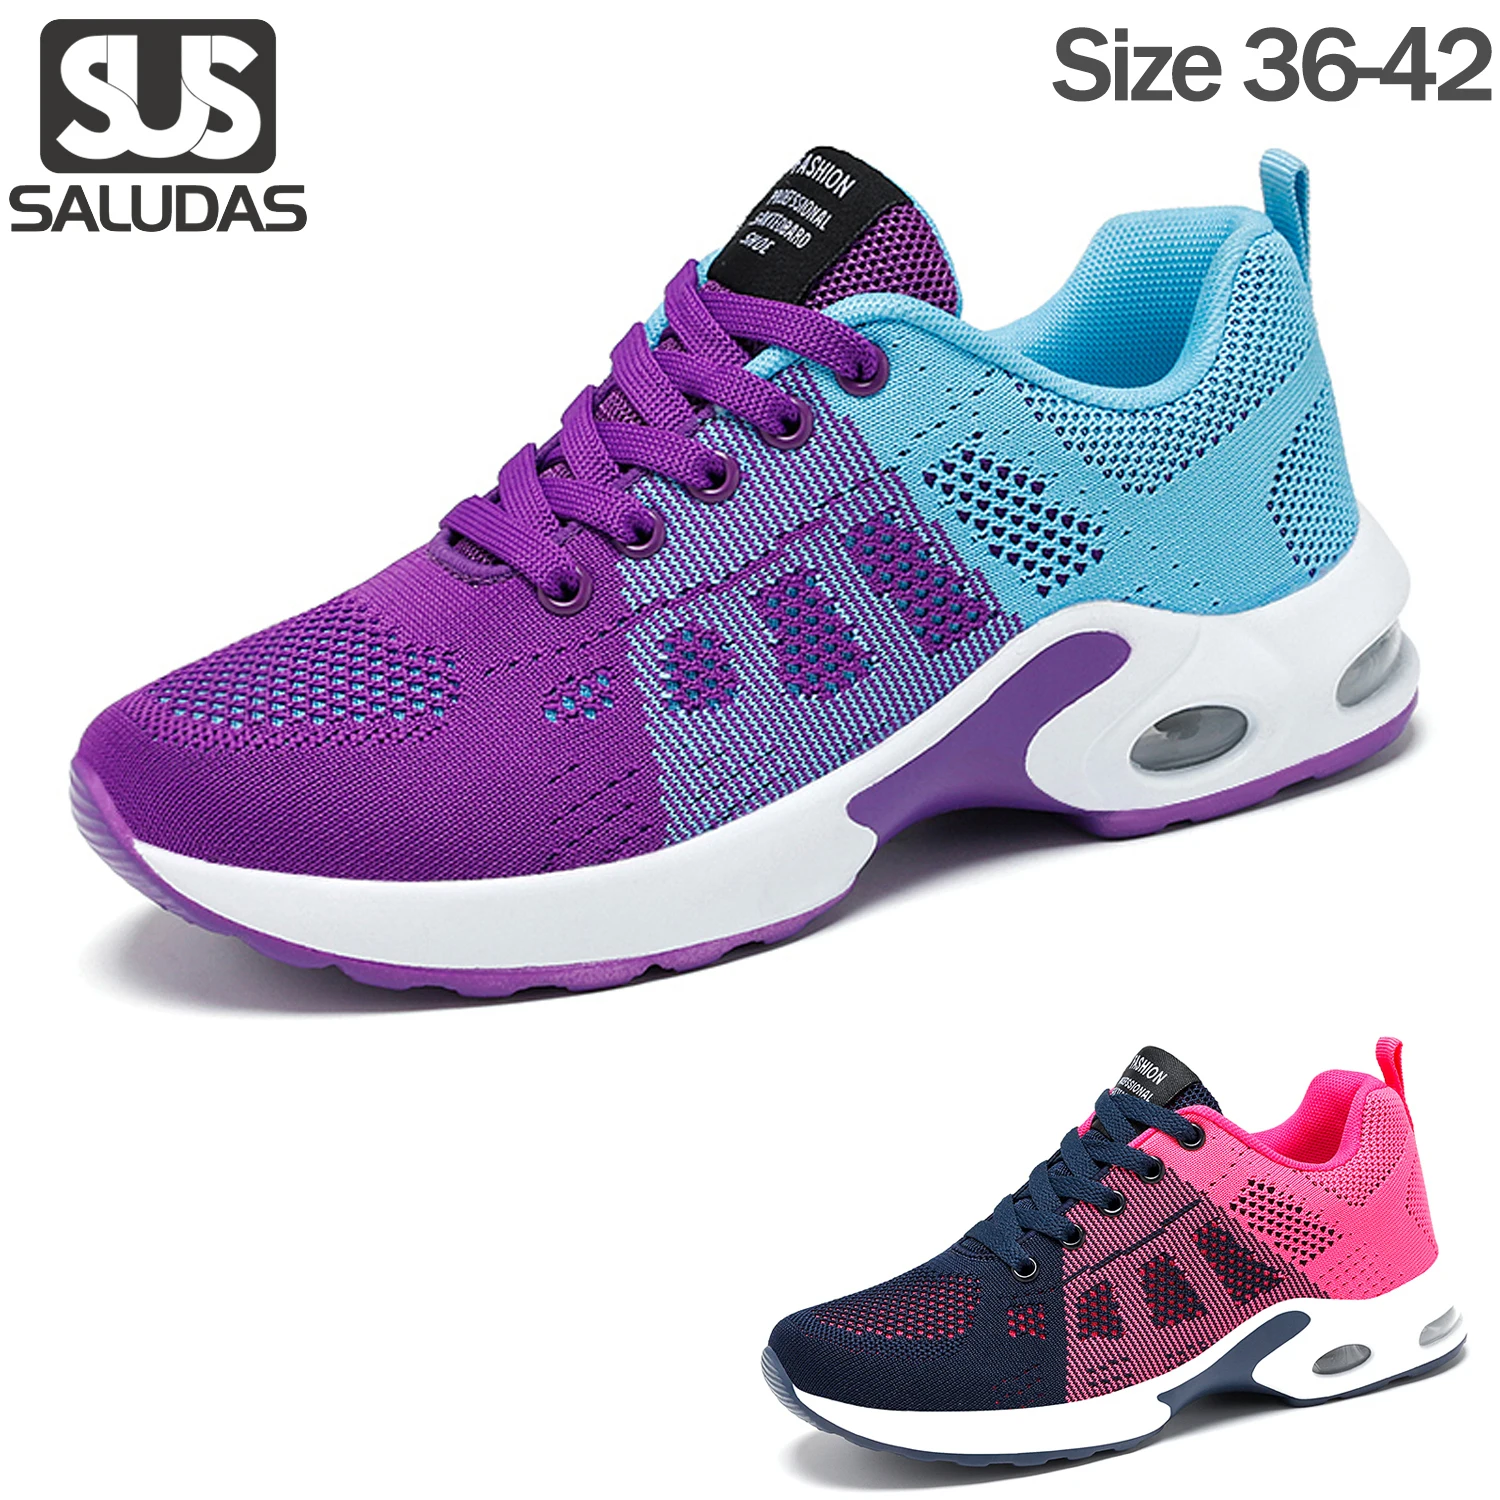 

SALUDAS Women Running Shoes Breathable Sport Shoes Outdoor Light Weight Casual Shoe Casual Walking Sneakers Tenis Feminino Shoes